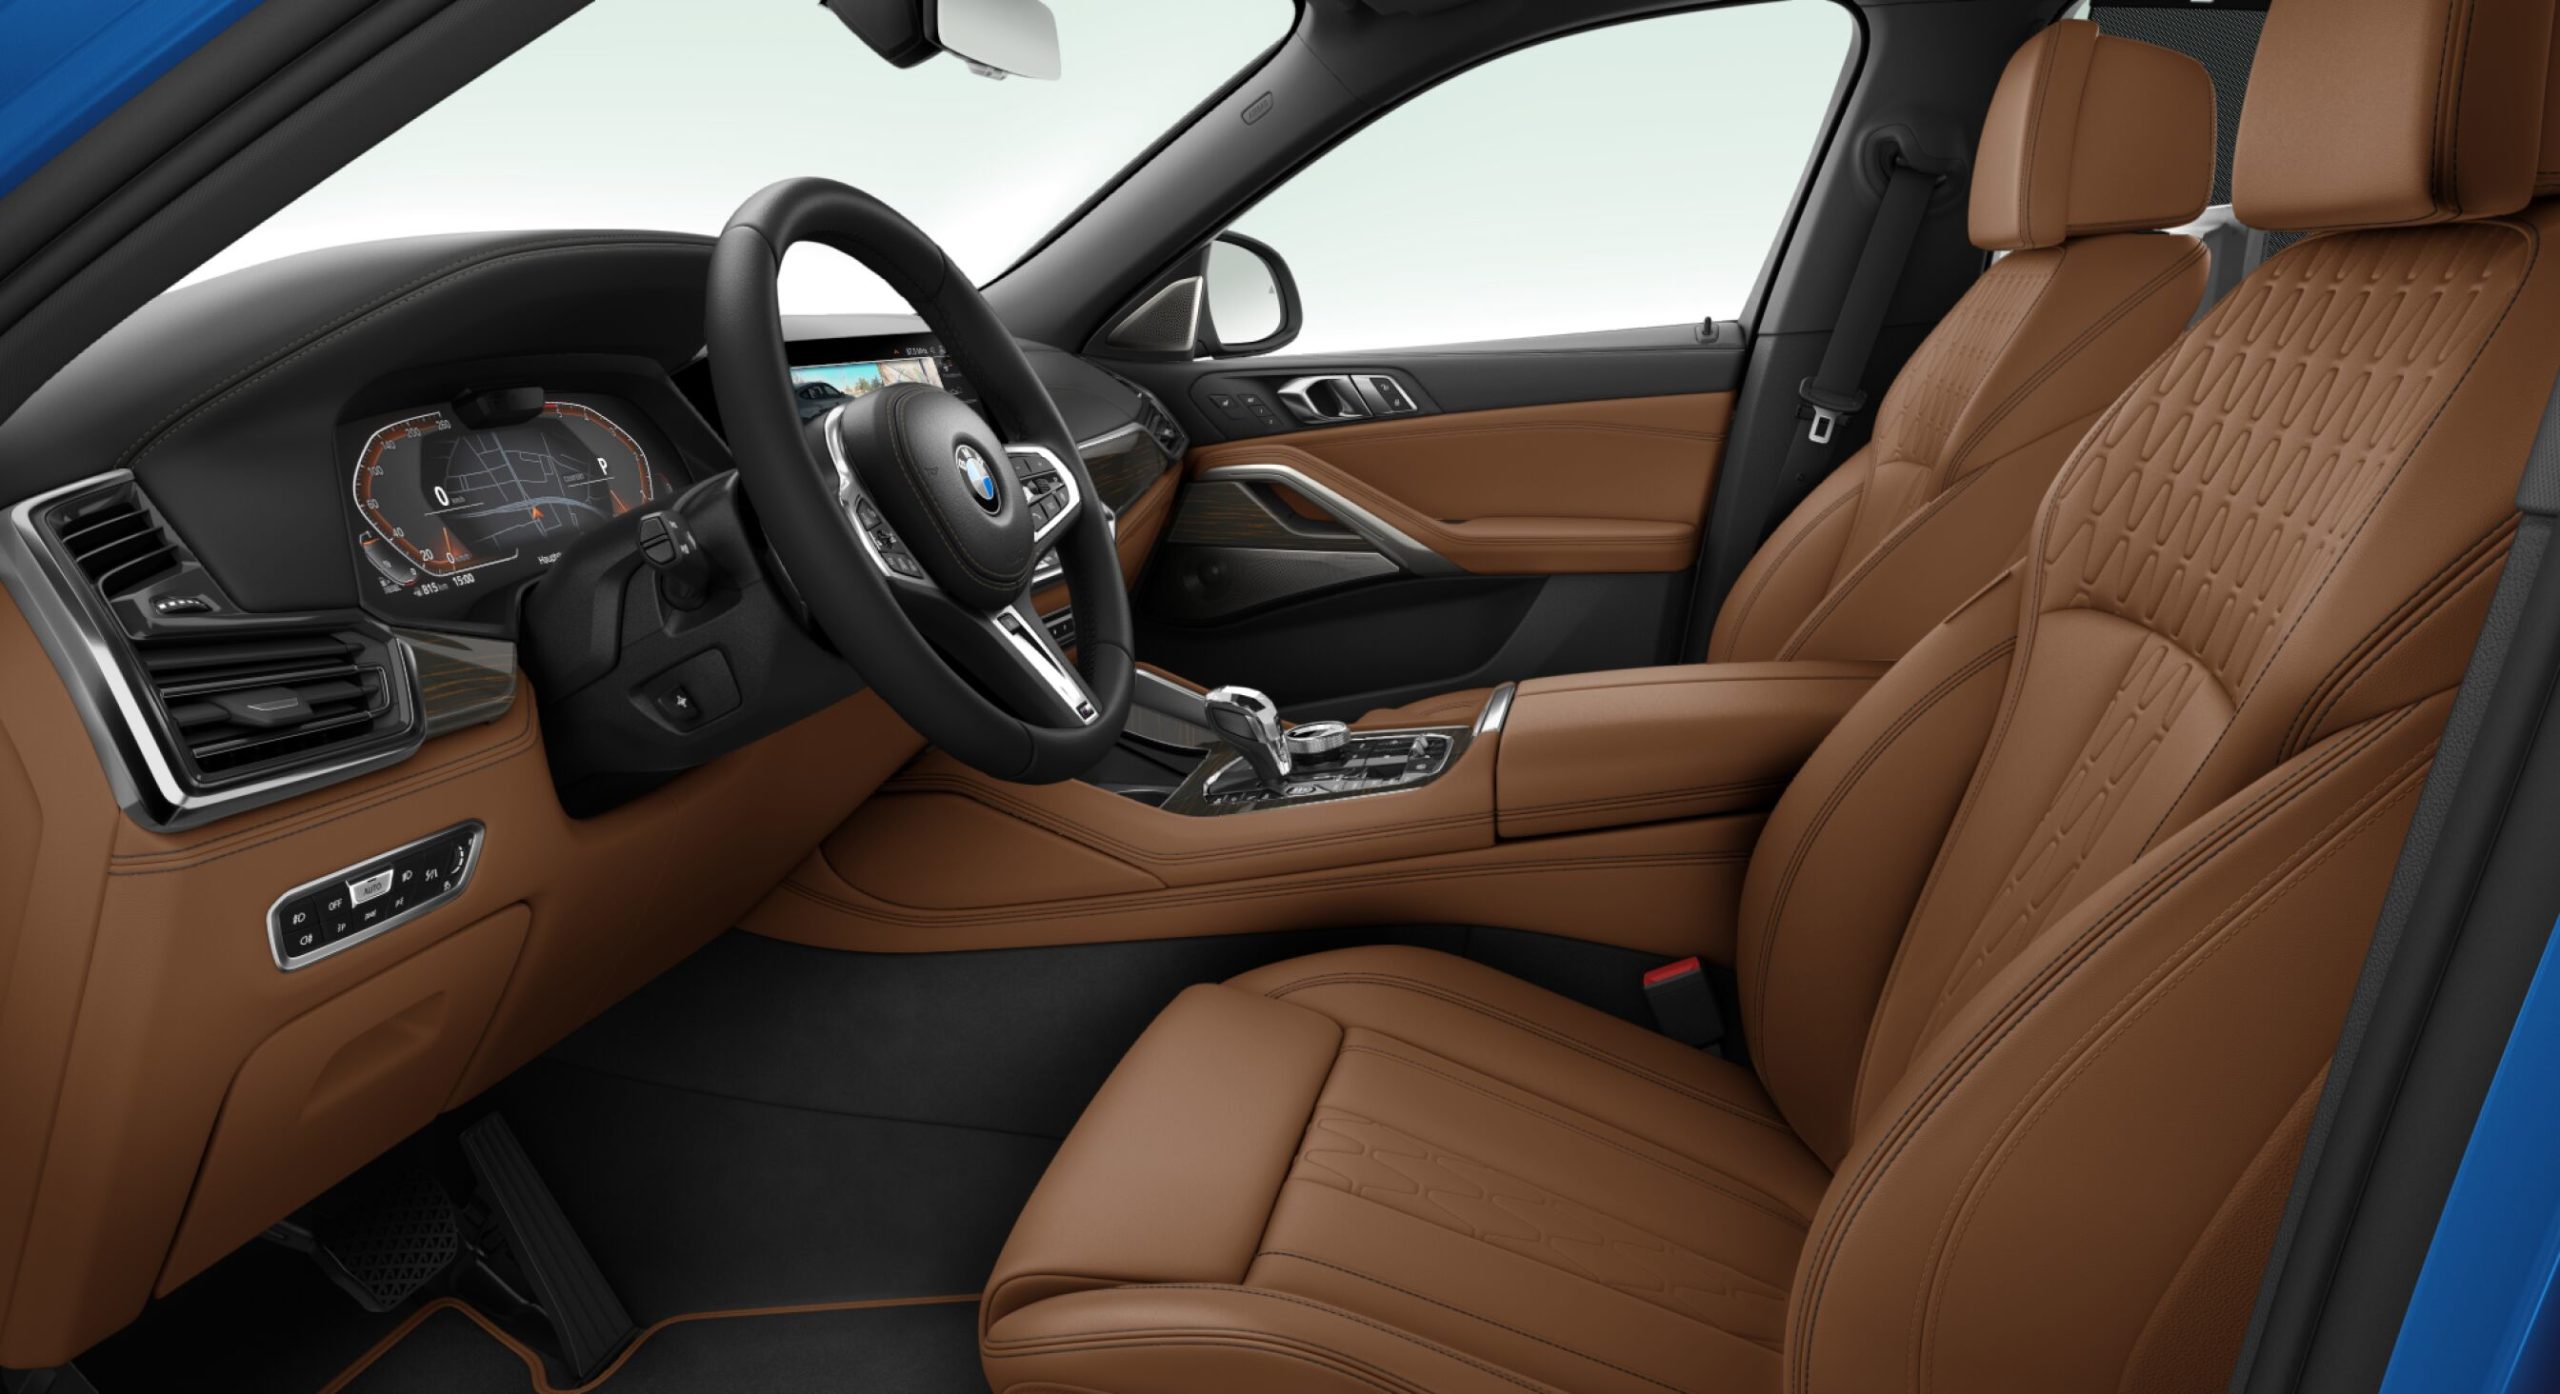 New BMW Individual, leathers and trims added to X5, X6 and X7